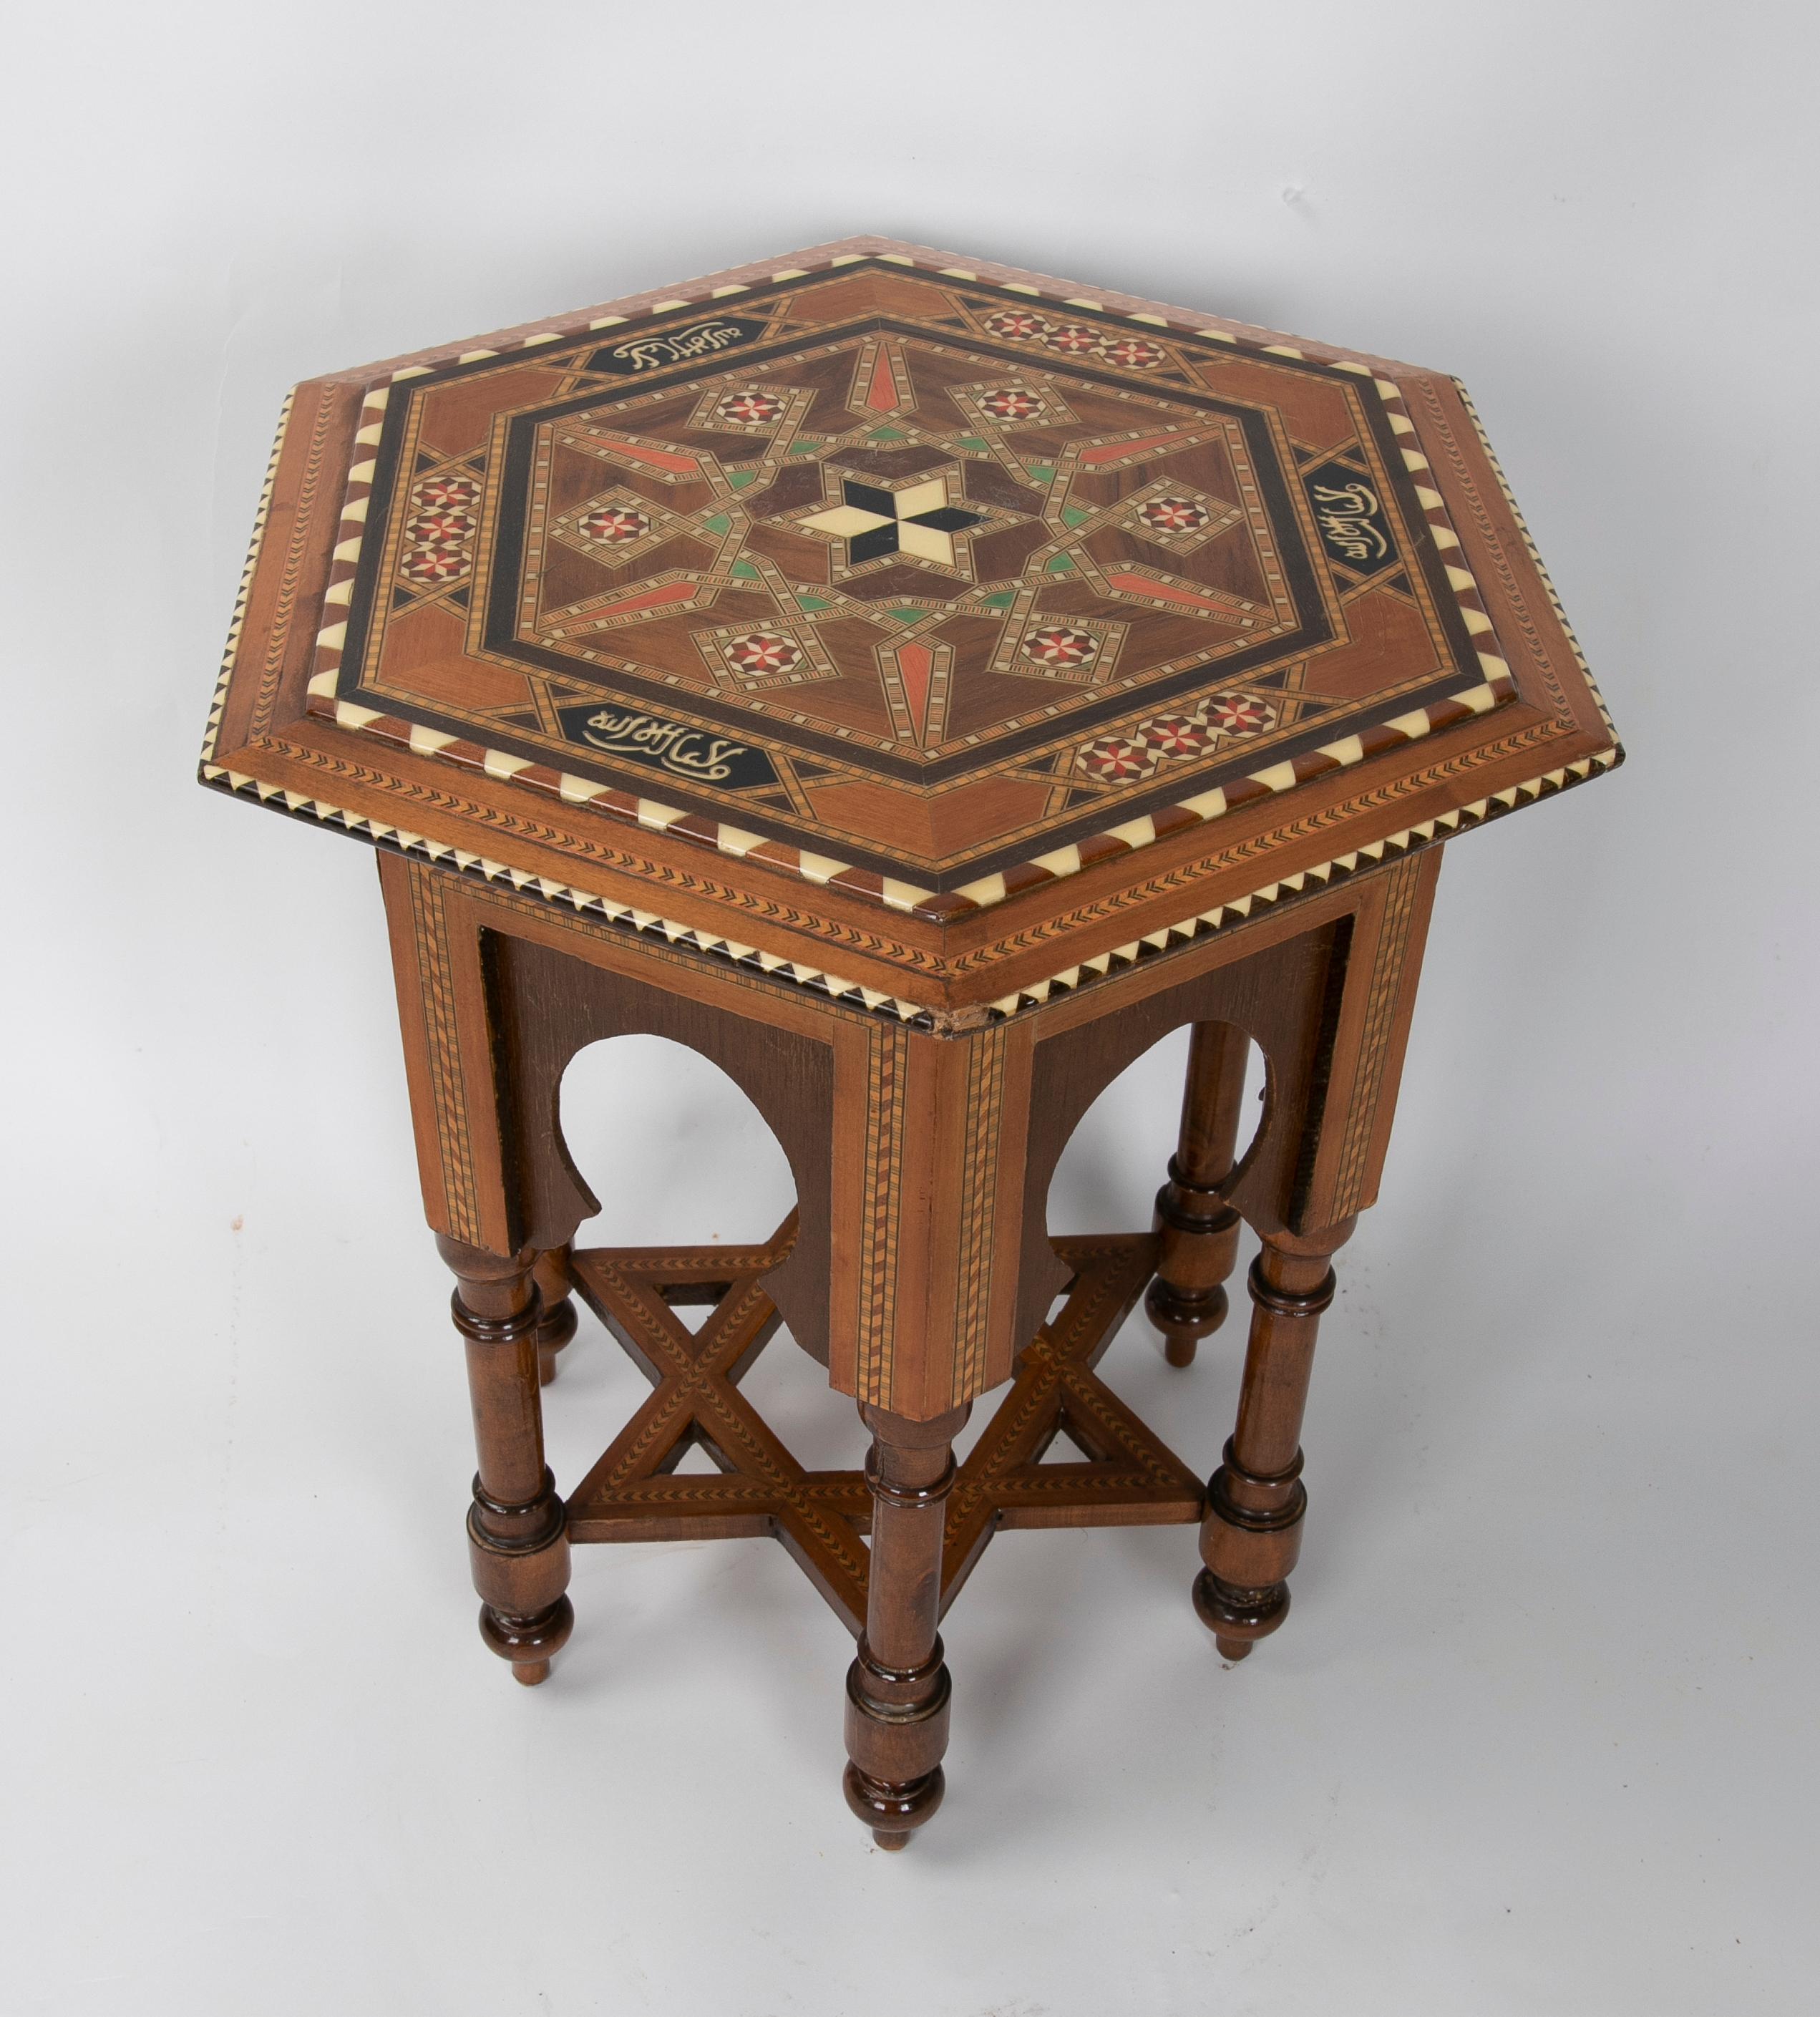 Wooden side table with Arabic style inlays.